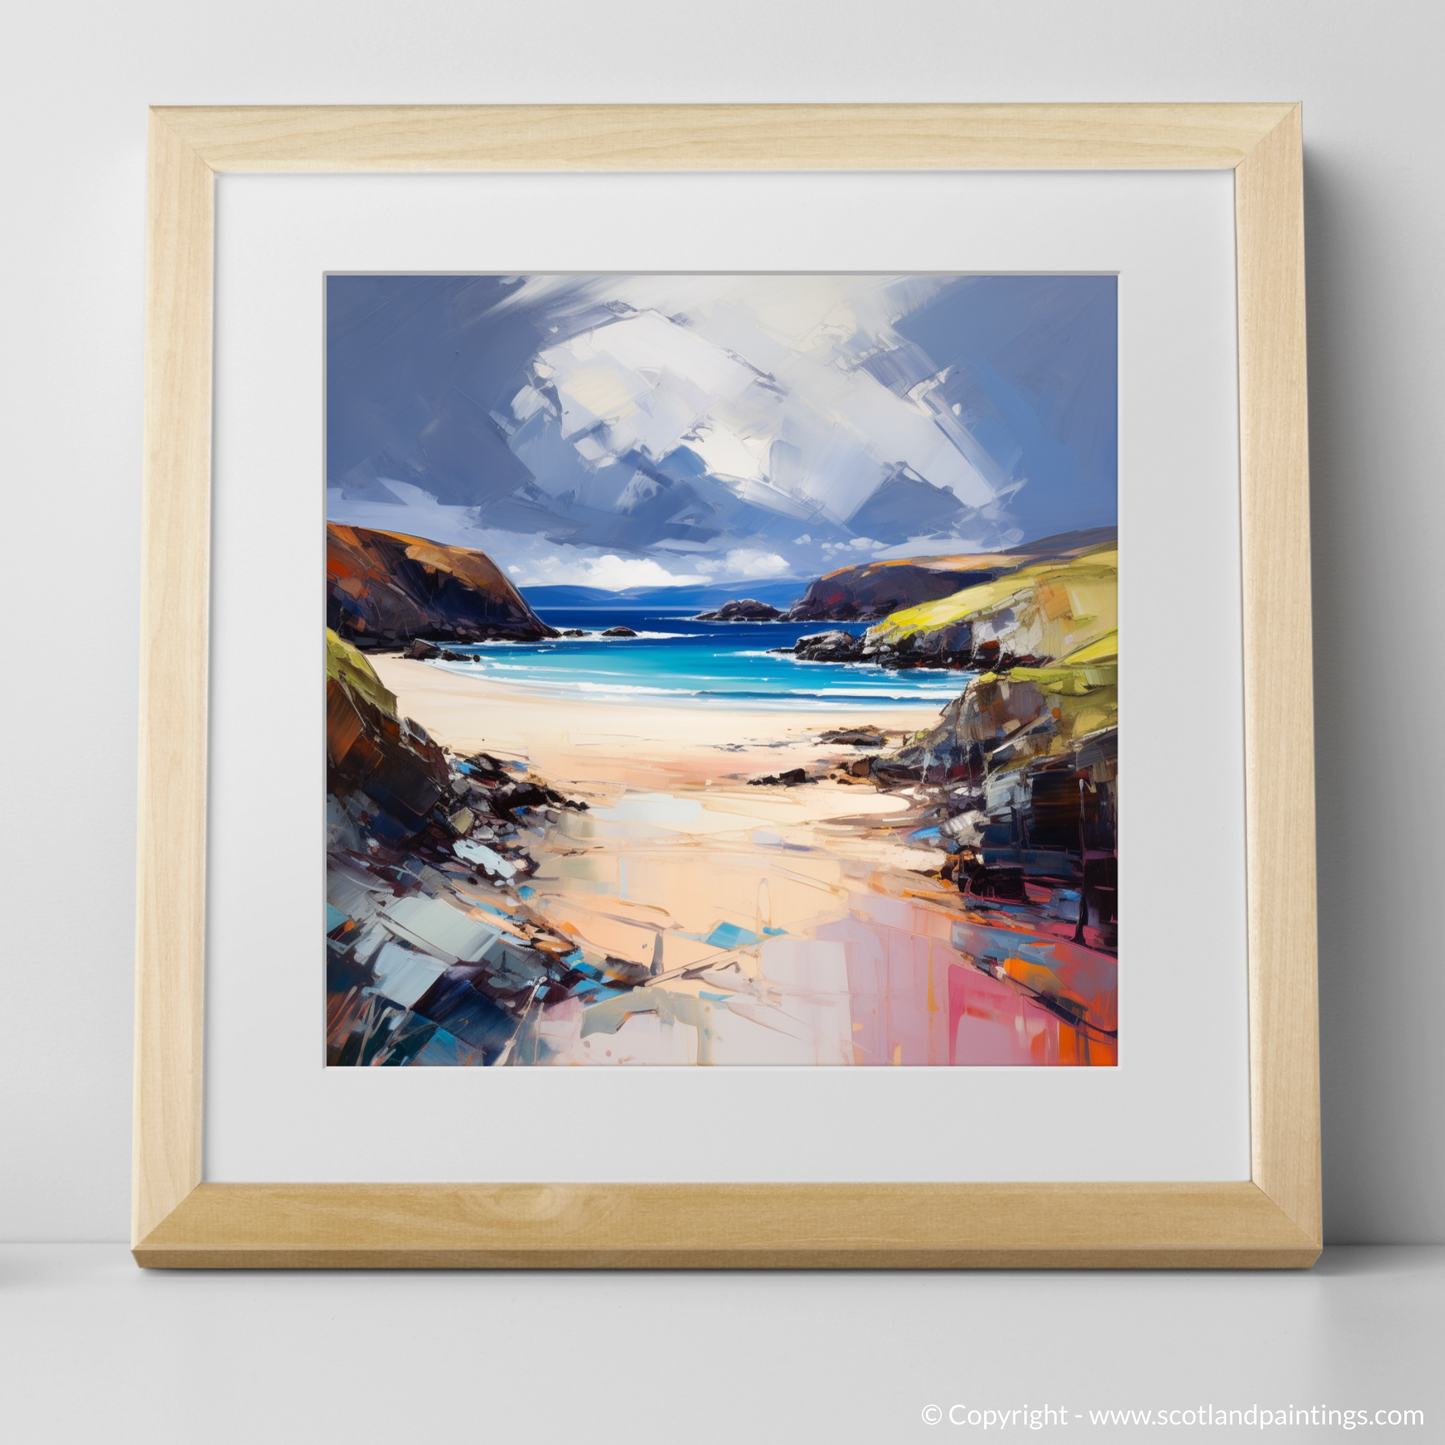 Art Print of Balnakeil Bay, Durness, Sutherland with a natural frame